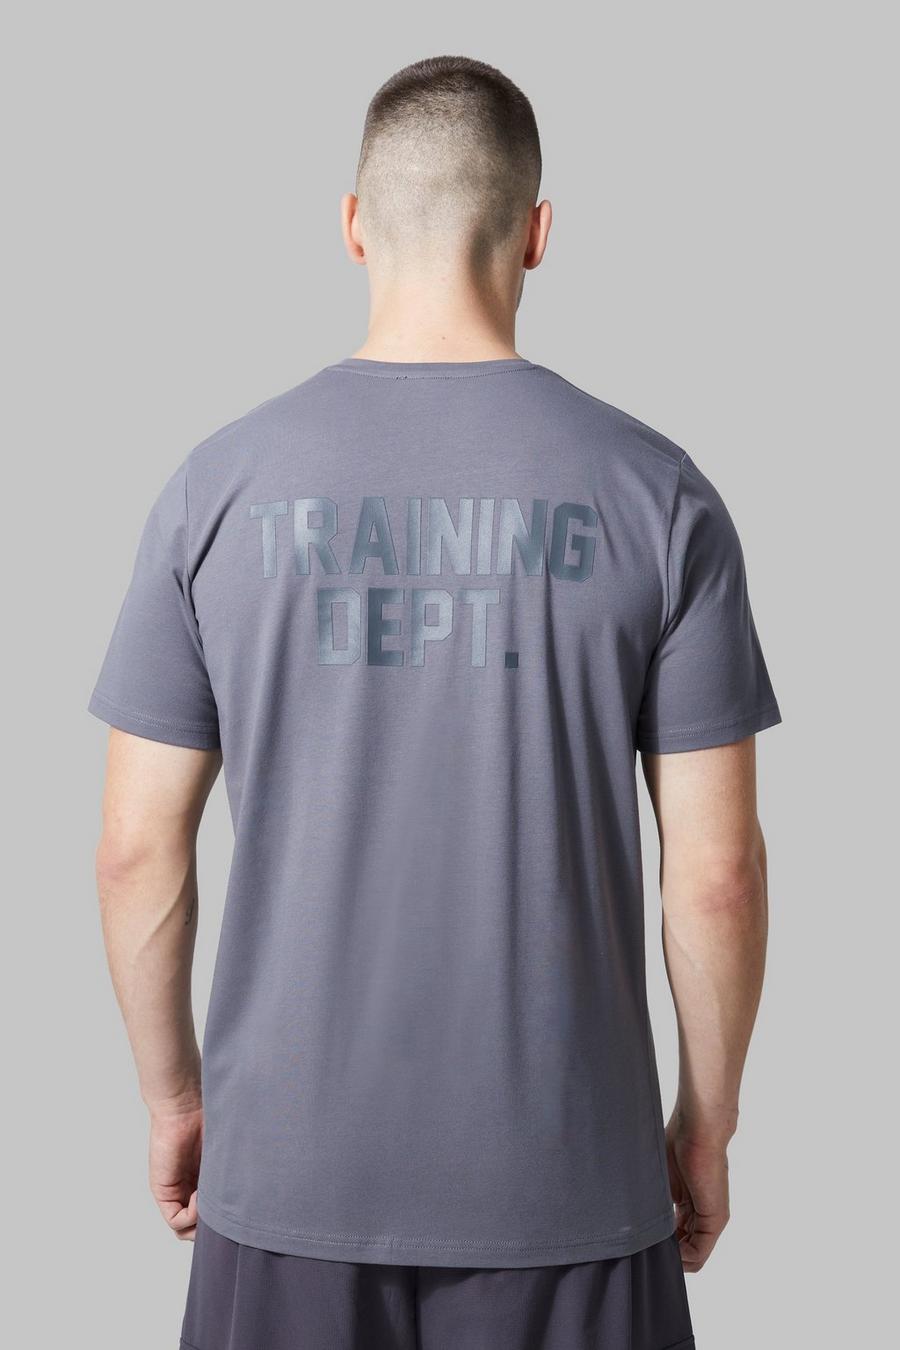 Charcoal gris Tall Slim Fit Active Training Dept Performance T-Shirt